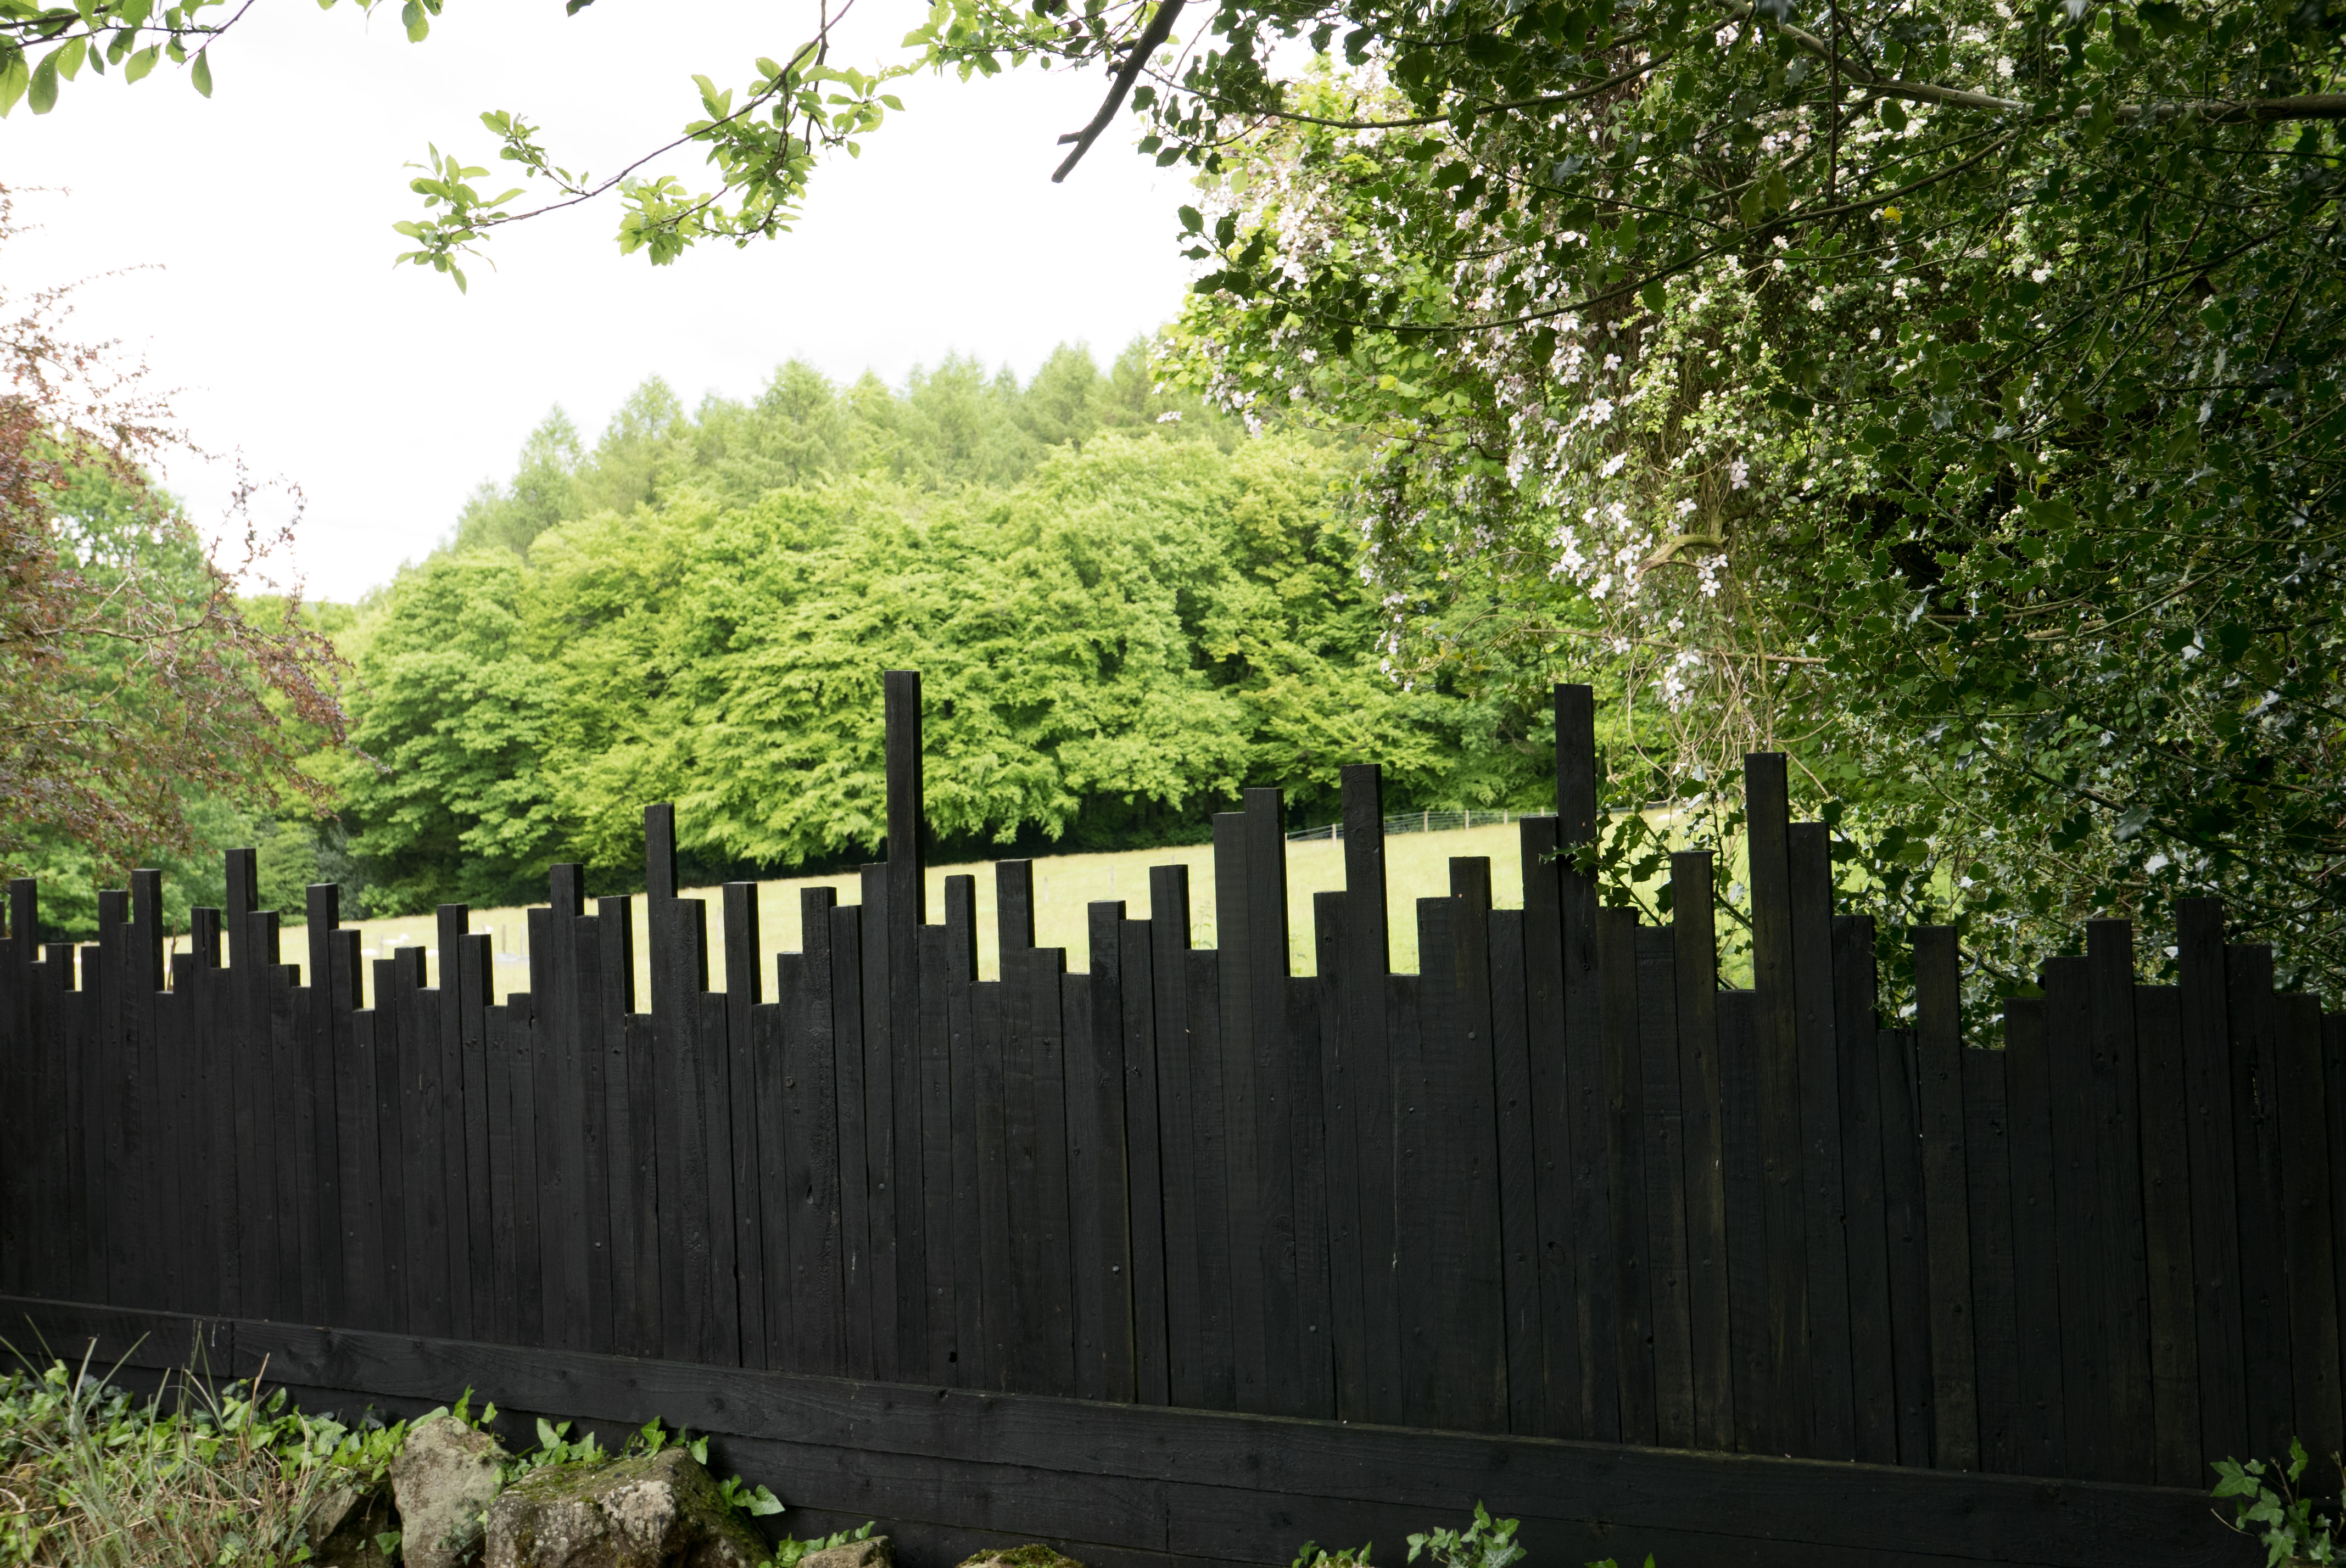 I like this simple fence. Made of inexpensive materials, it nonetheless looks sculptural, almost like a city skyline or rolling hills.